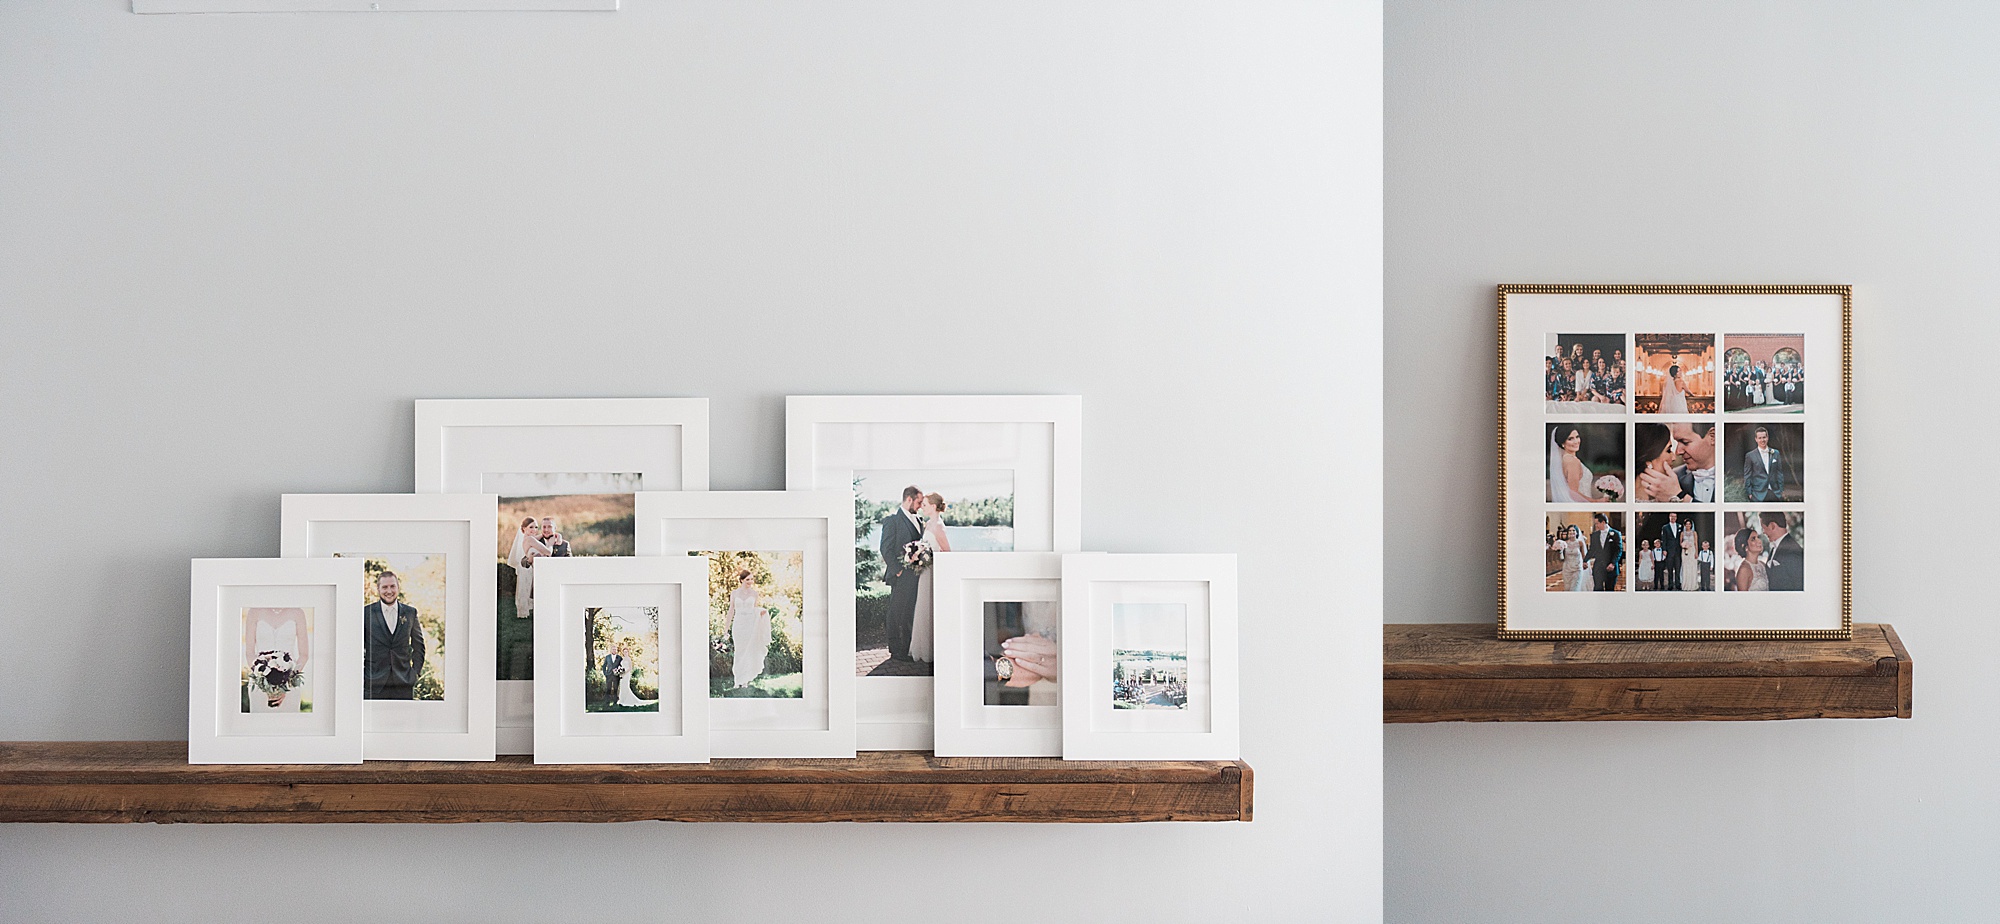 Framed wedding photos from Allie Siarto Photography, East Lansing, Michigan wedding photographers